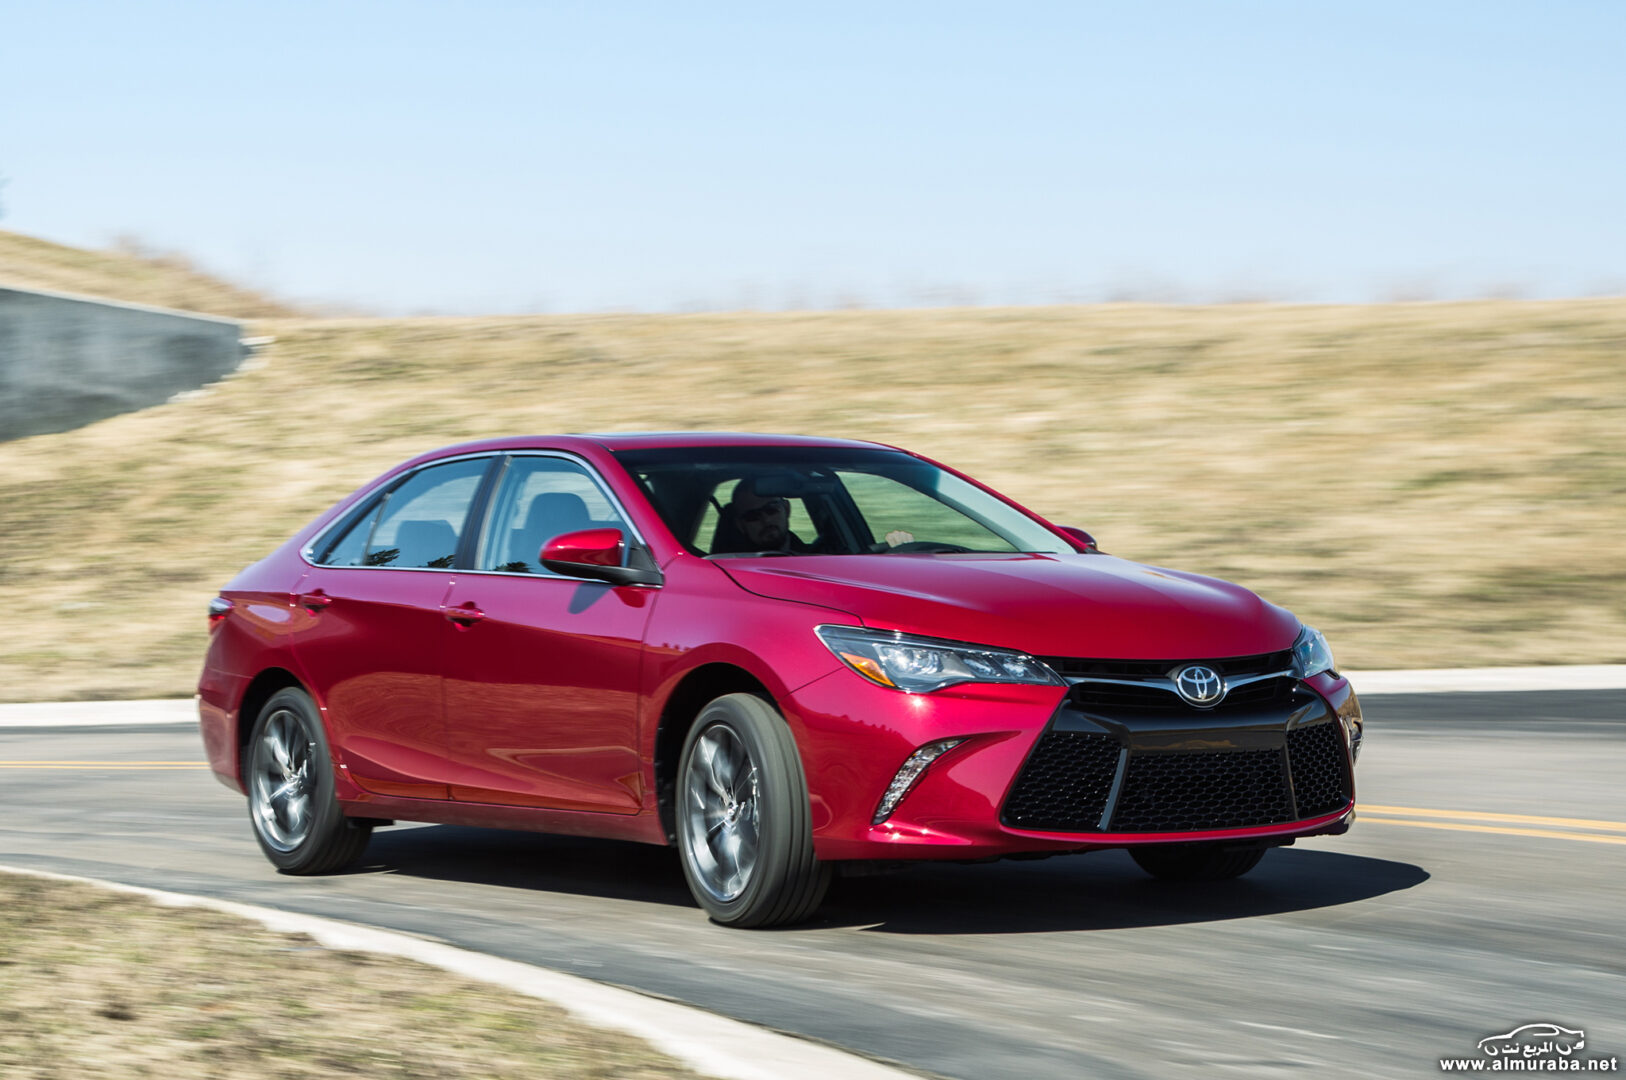 http---image.motortrend.com-f-roadtests-sedans-1404_2015_toyota_camry_first_look-72594852-2015-toyota-camry-profile-in-motion